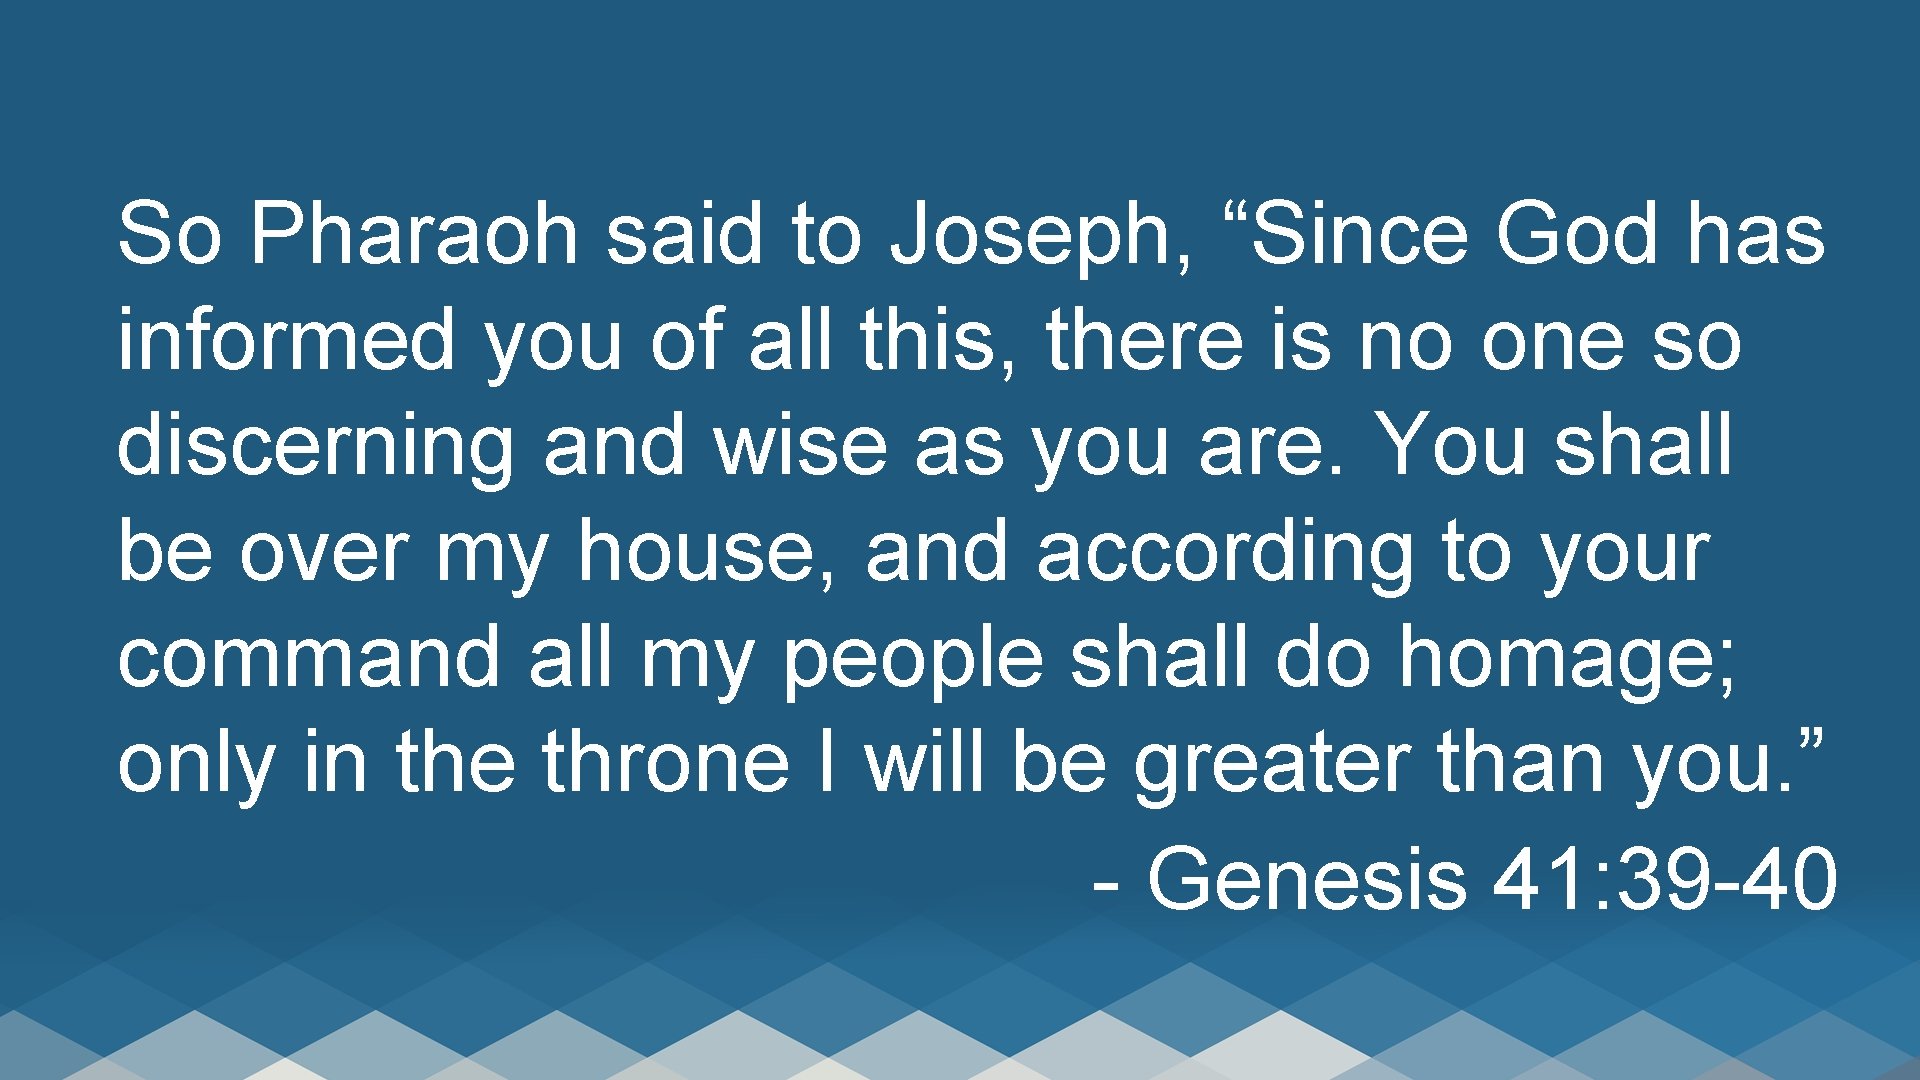 So Pharaoh said to Joseph, “Since God has informed you of all this, there